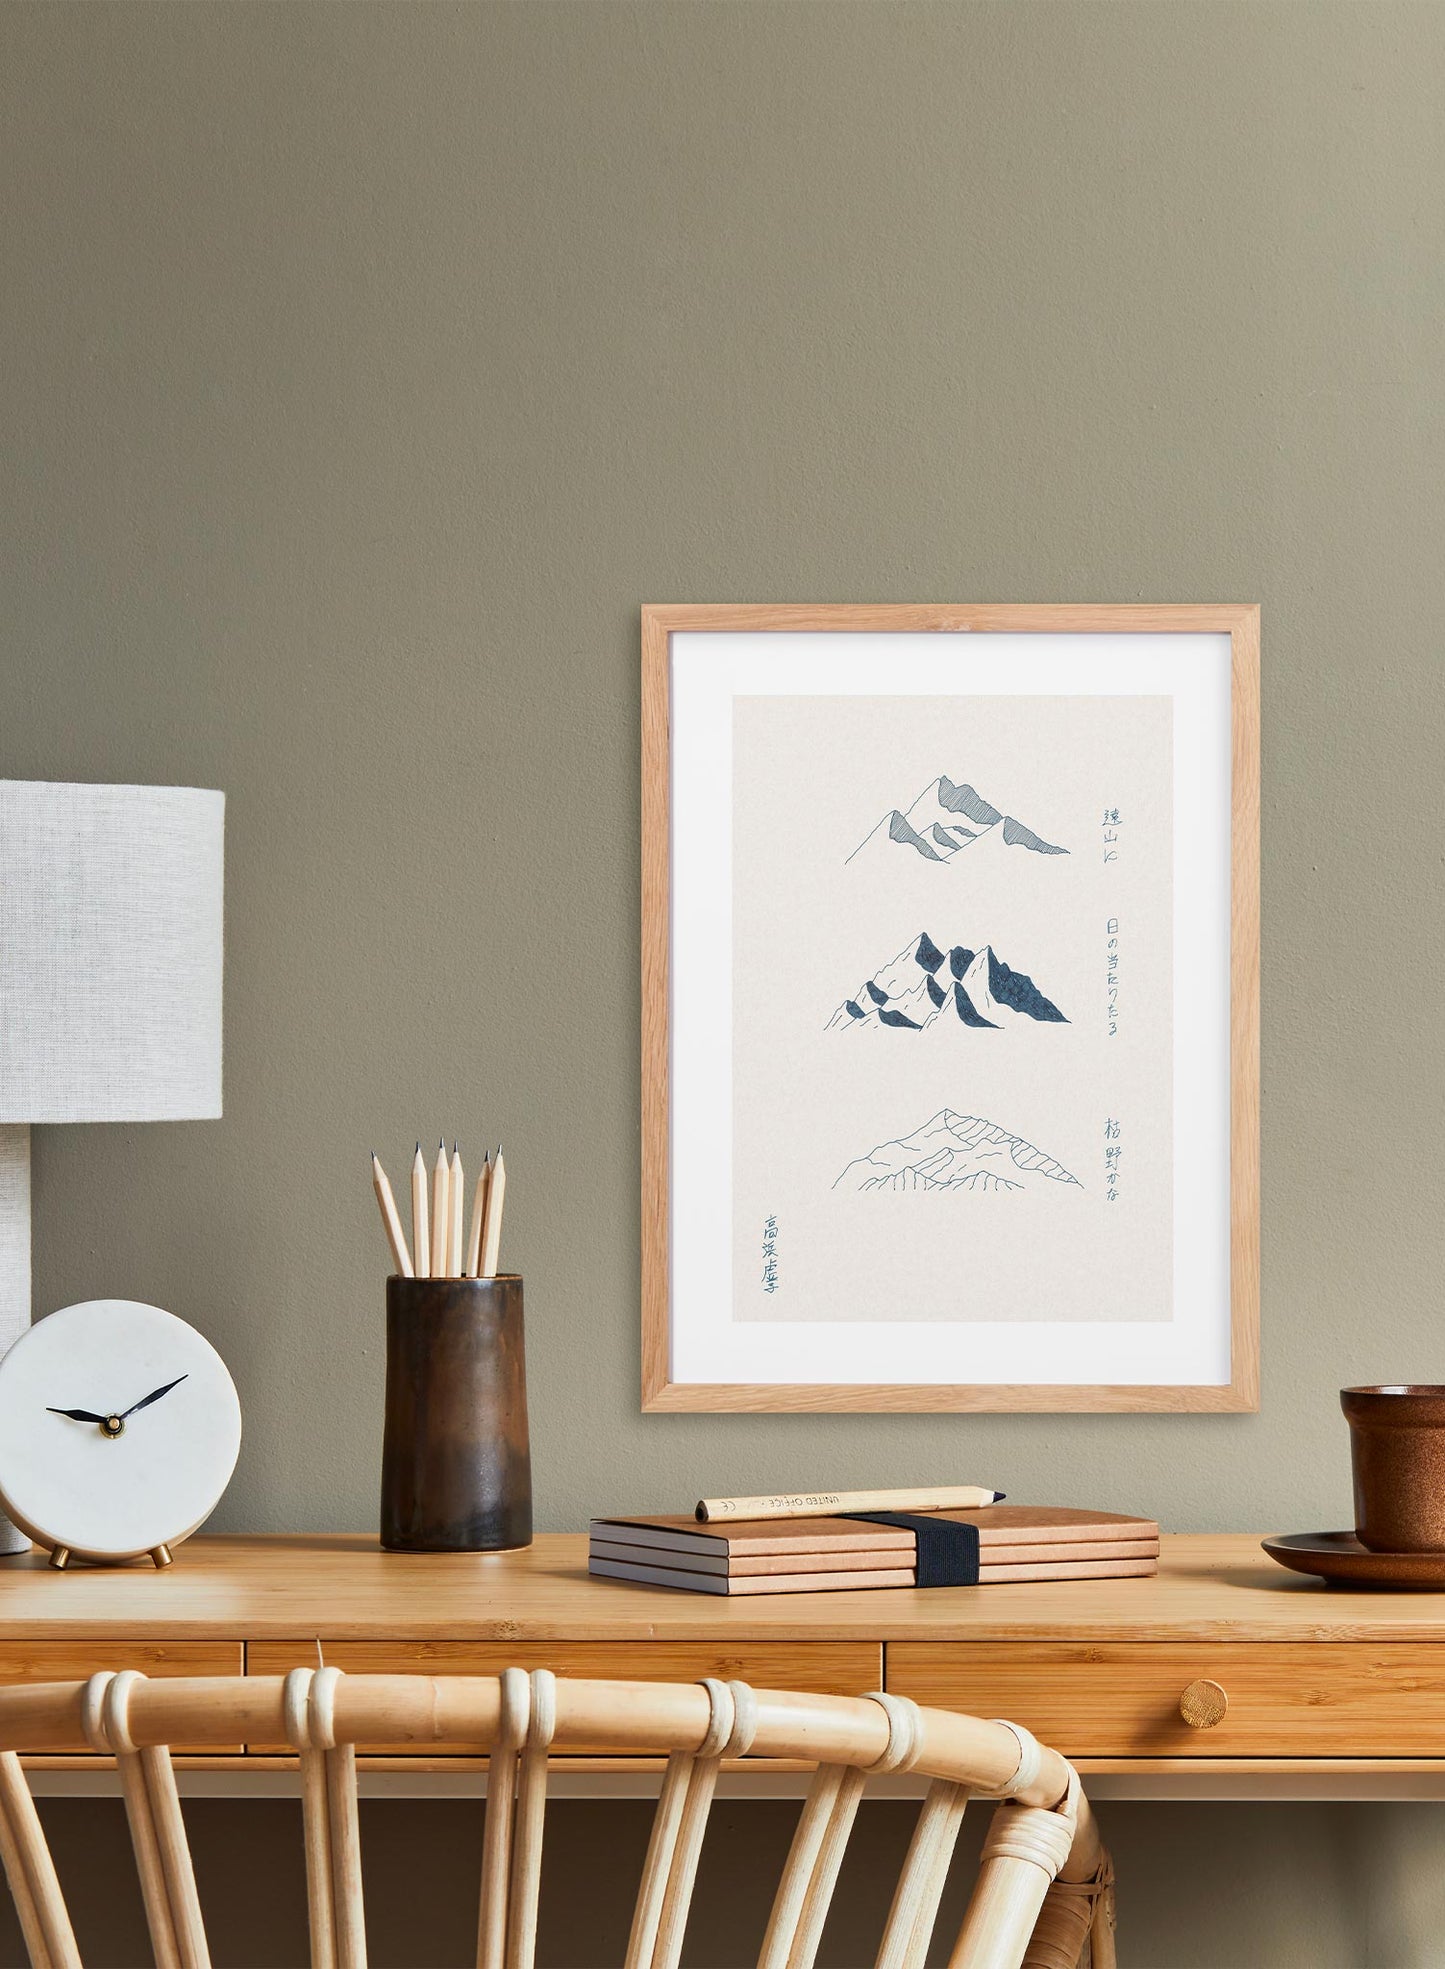 Fuji is a minimalist illustration by Opposite Wall of three types of mountains drawn by hand.